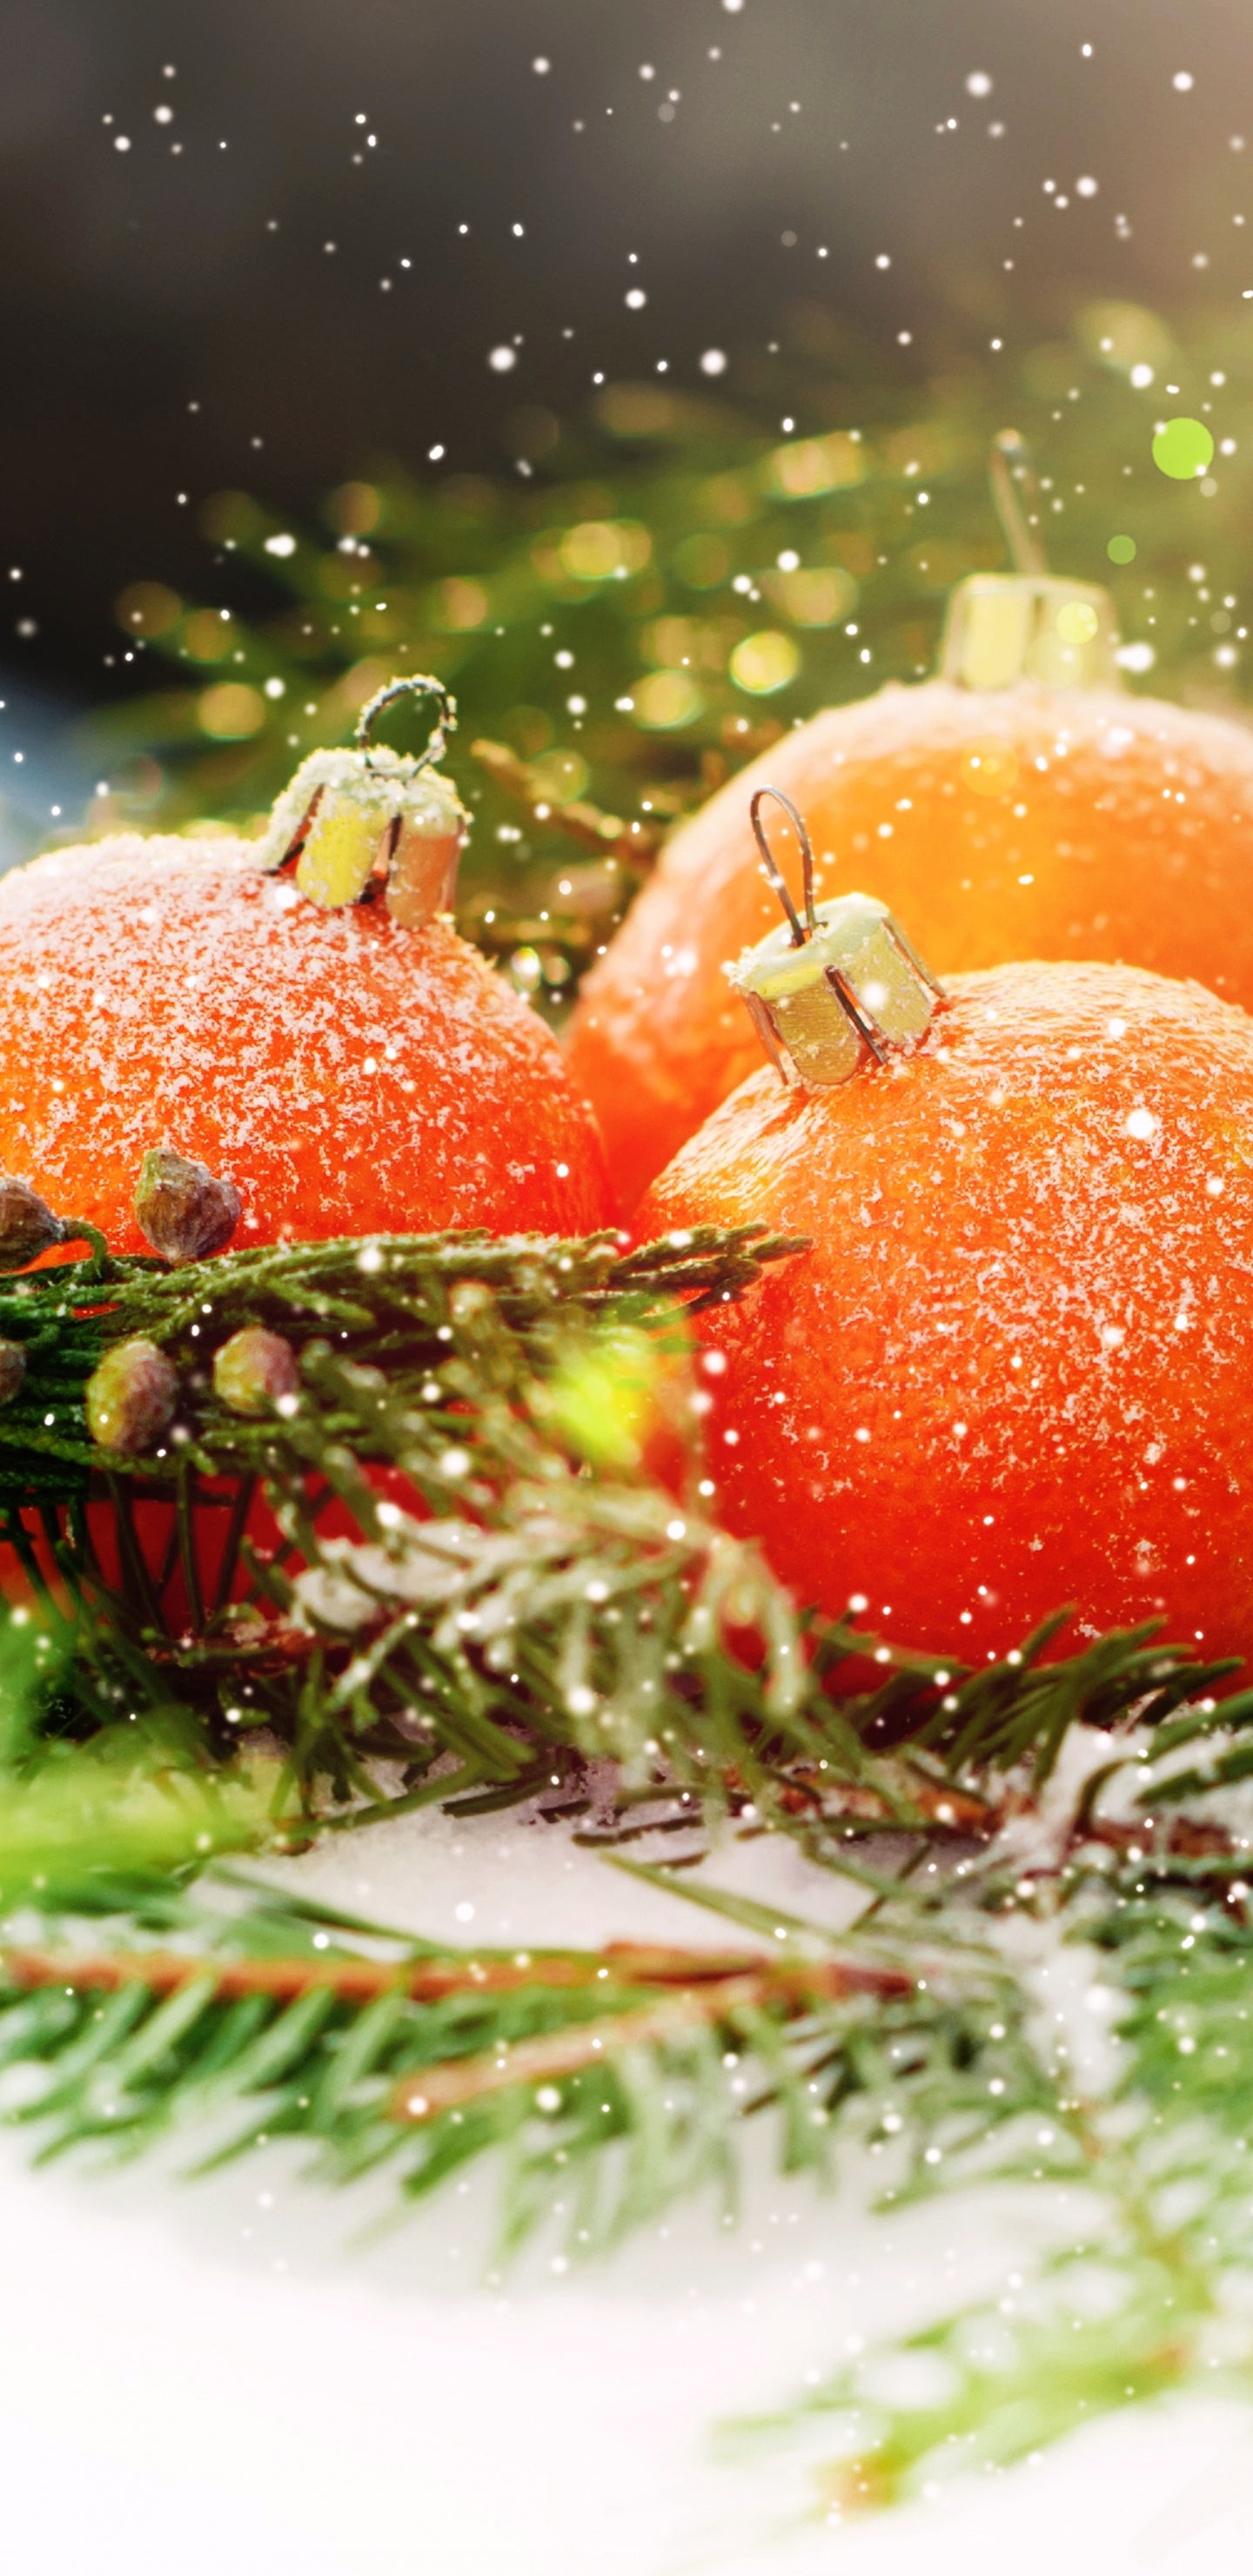 Christmas Day, New Year, Vegetarian Food, Food, Vegetable. Wallpaper in 1440x2960 Resolution